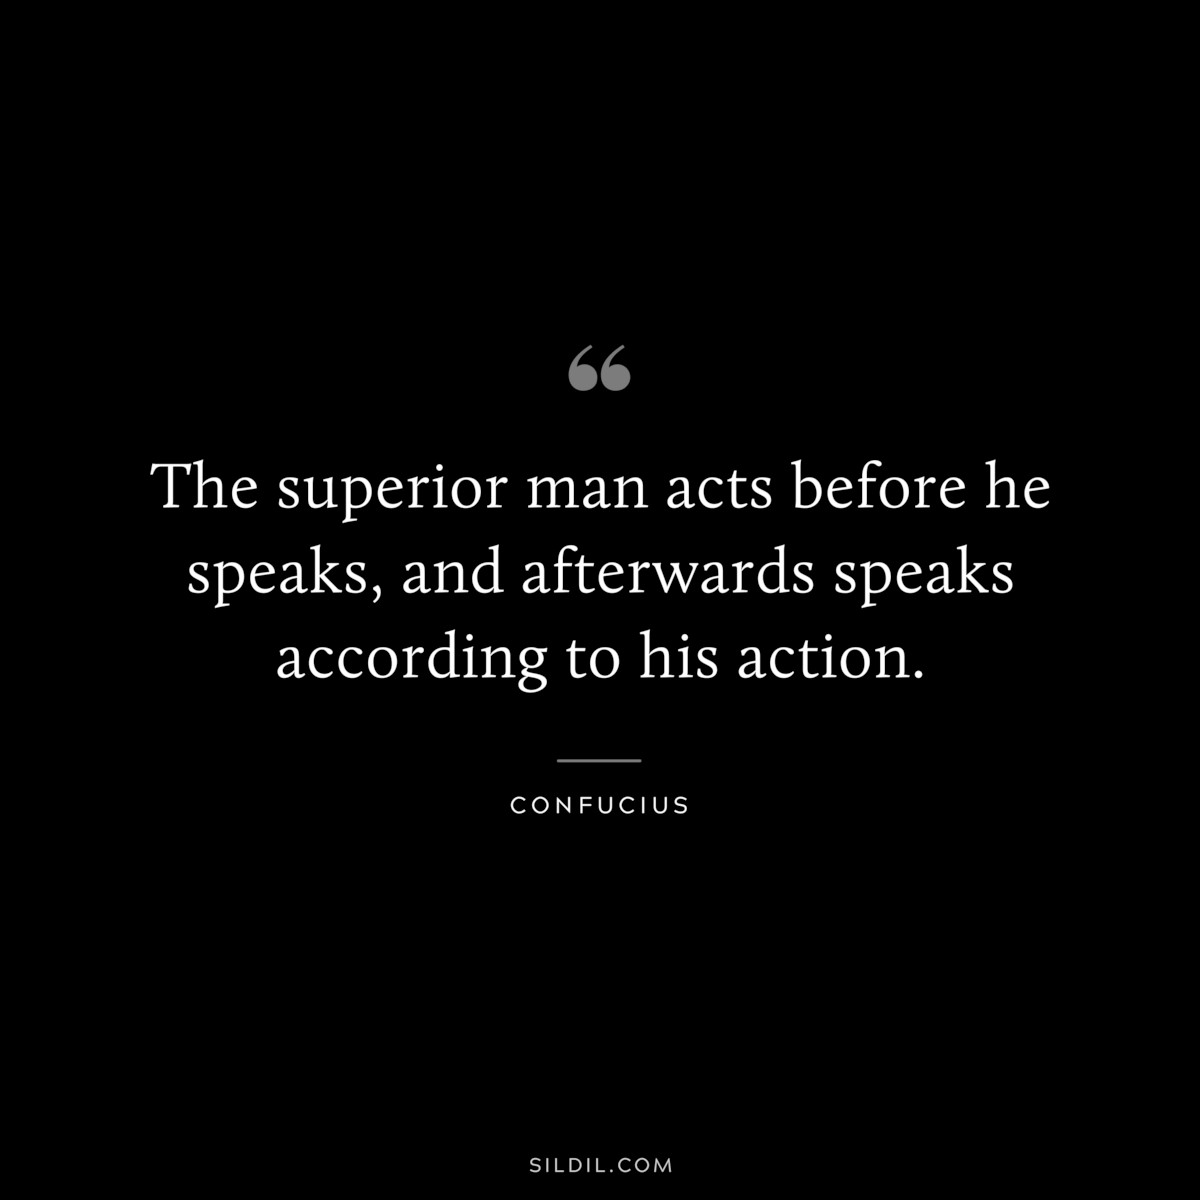 The superior man acts before he speaks, and afterwards speaks according to his action. ― Confucius